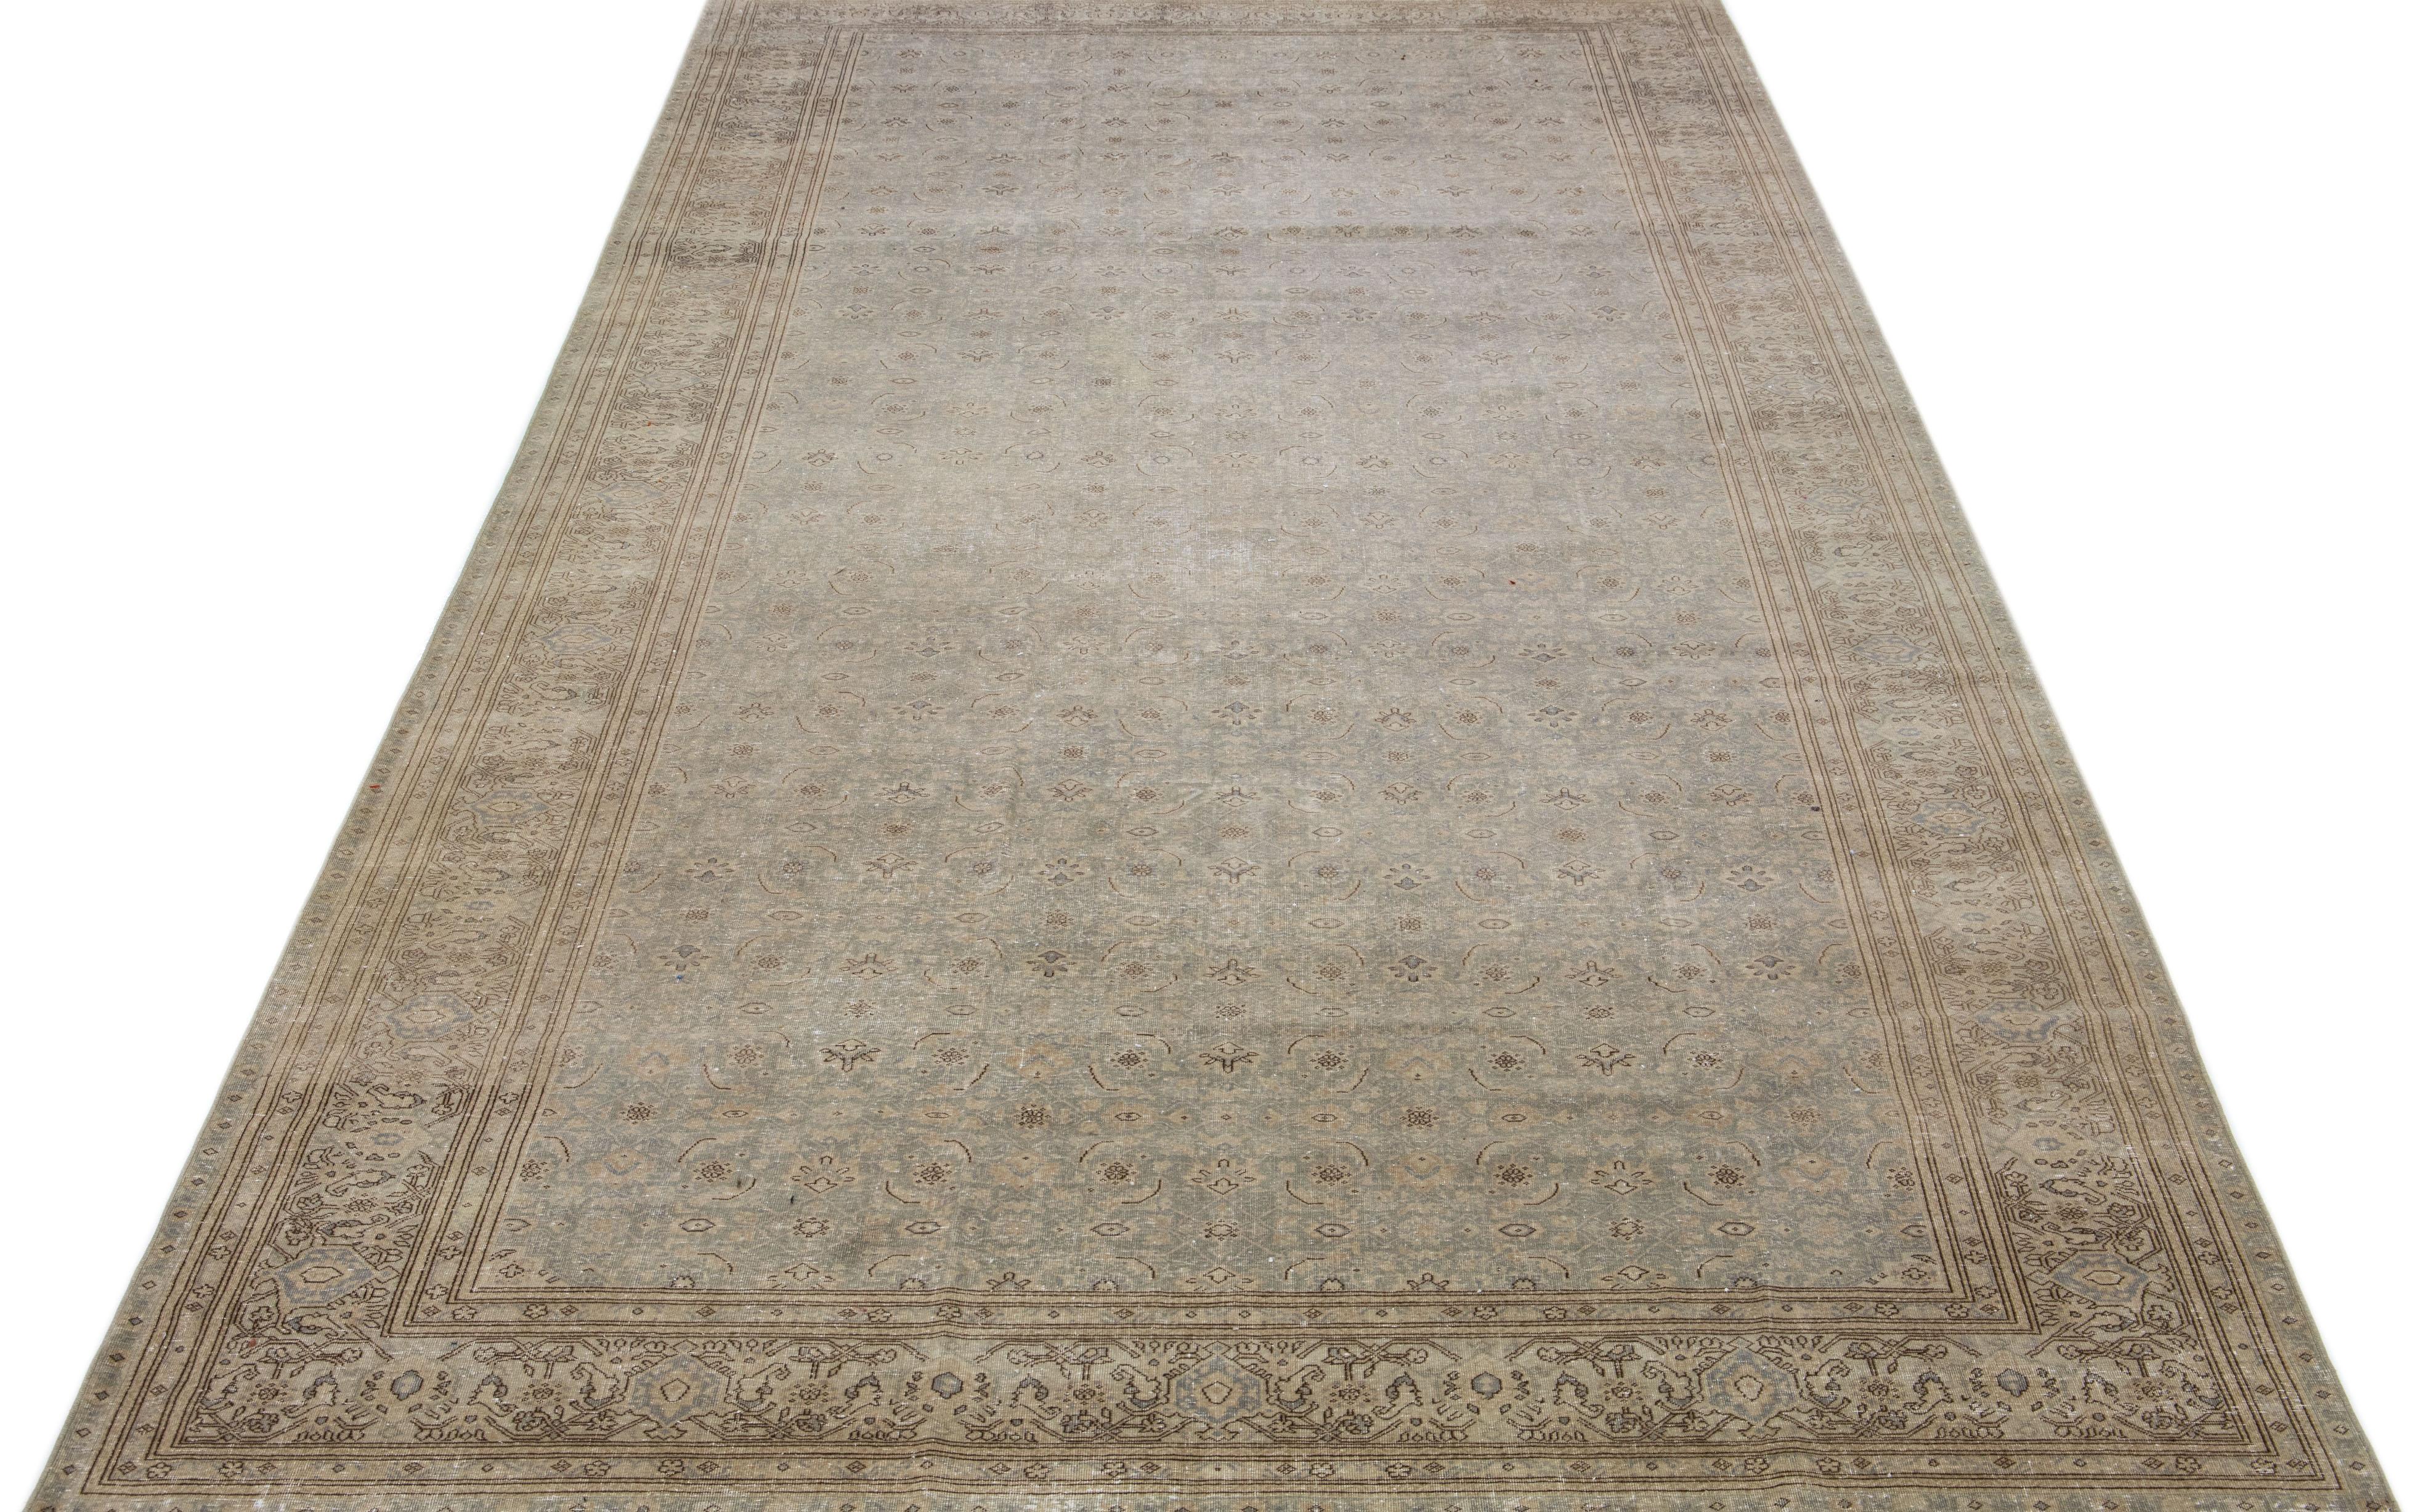 Beautiful hand-knotted antique Agra wool rug with a gray color field. This Persian rug has brown and blue accent colors in an all-over floral design. 

This rug measures: 7'2